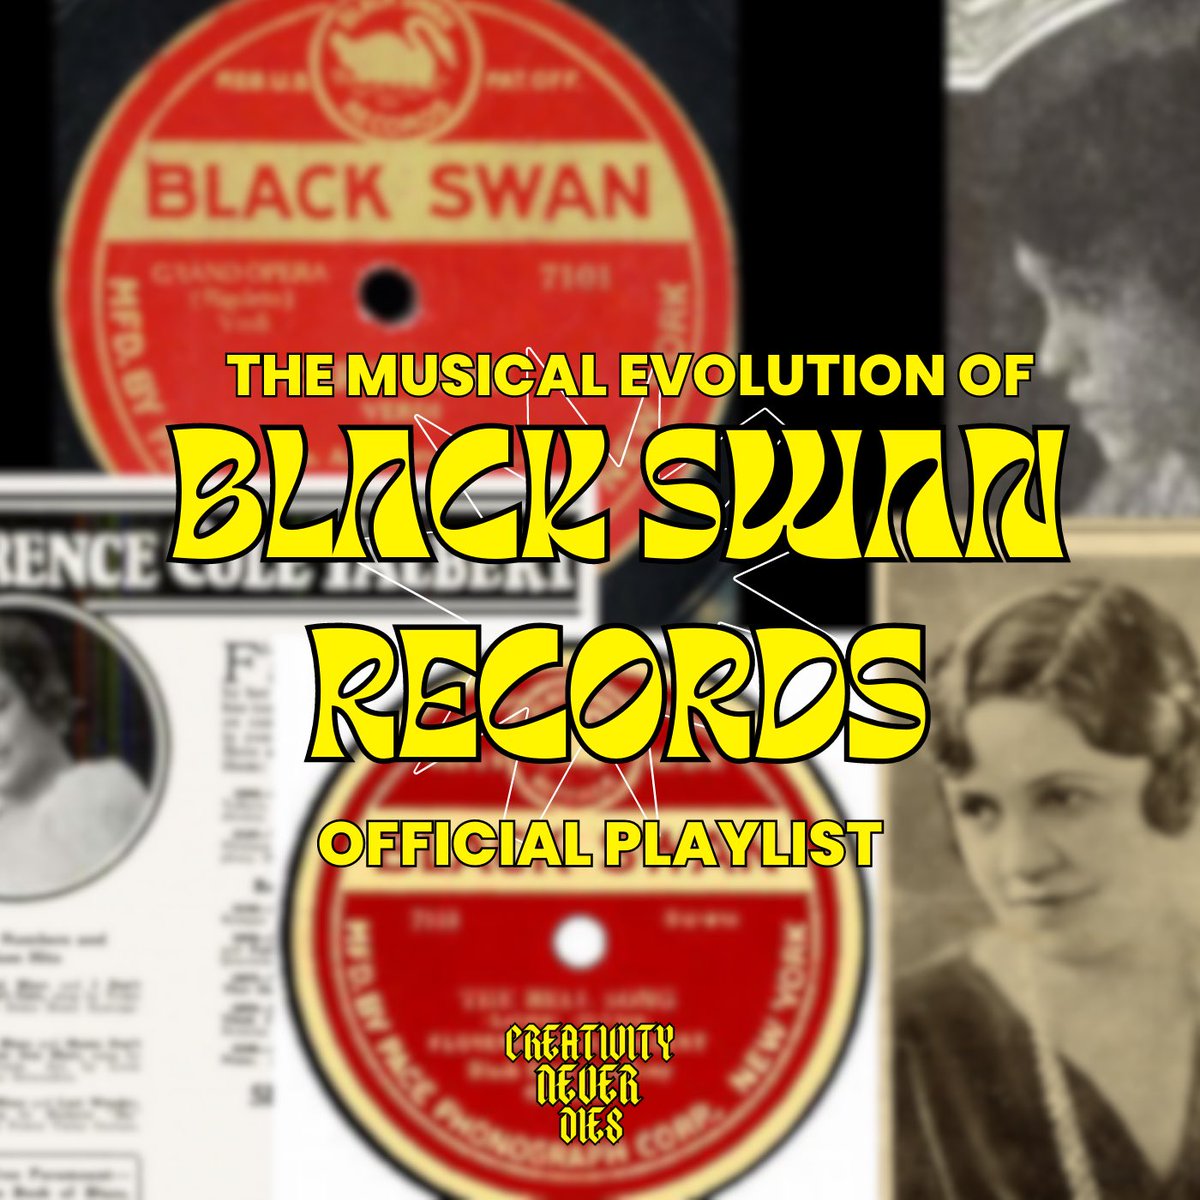 Explore ‘The Musical Evolution’ of #blackswanrecords with our Official Playlist featuring music from Ethel Waters, Trixie Smith, Alberta Hunter & more! 

Spotify: shorturl.at/BT267

Tidal: shorturl.at/KMQY2